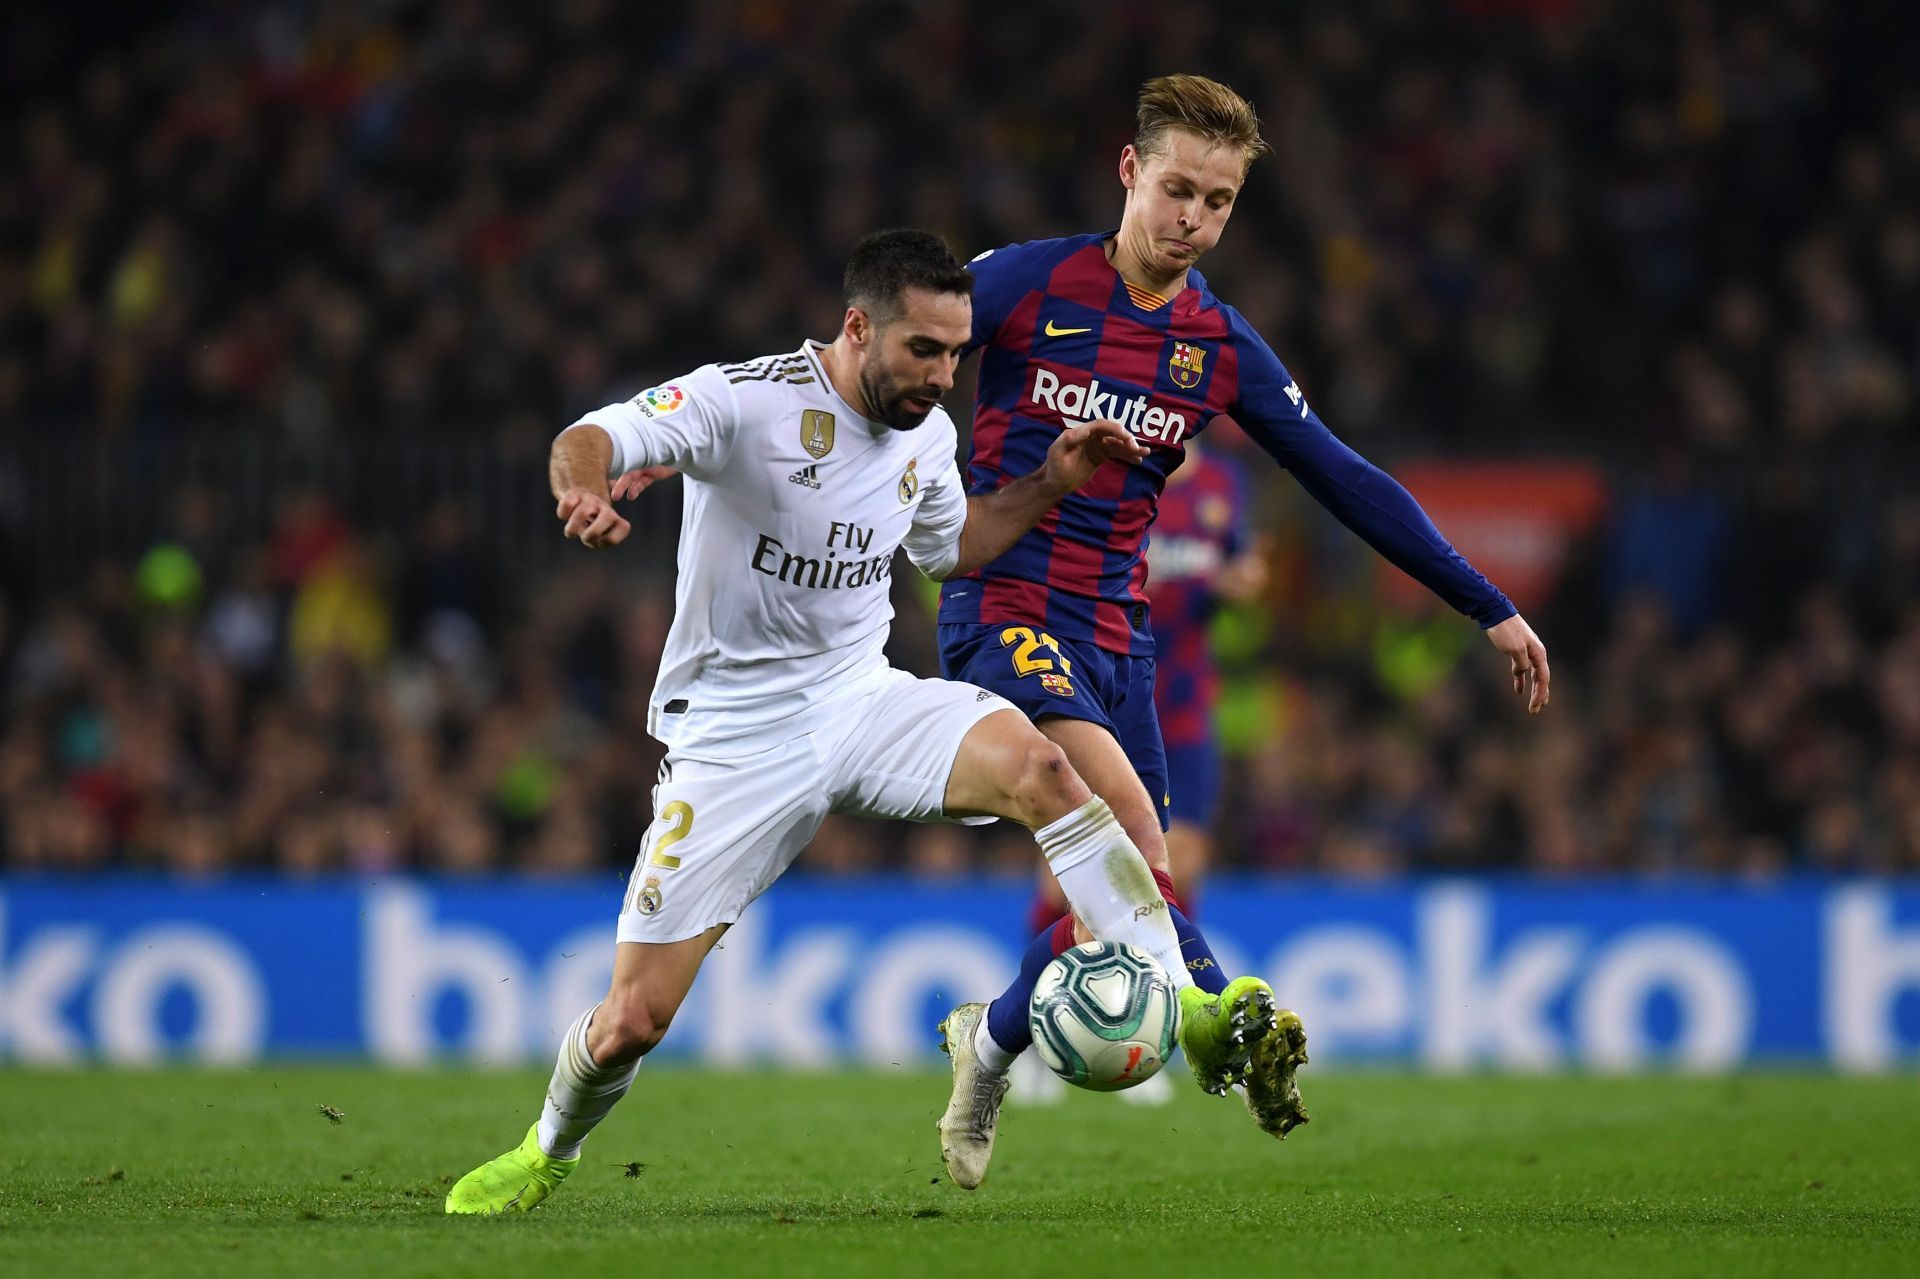 Dani Carvajal could benefit from a move away from the Santiago Bernabeu